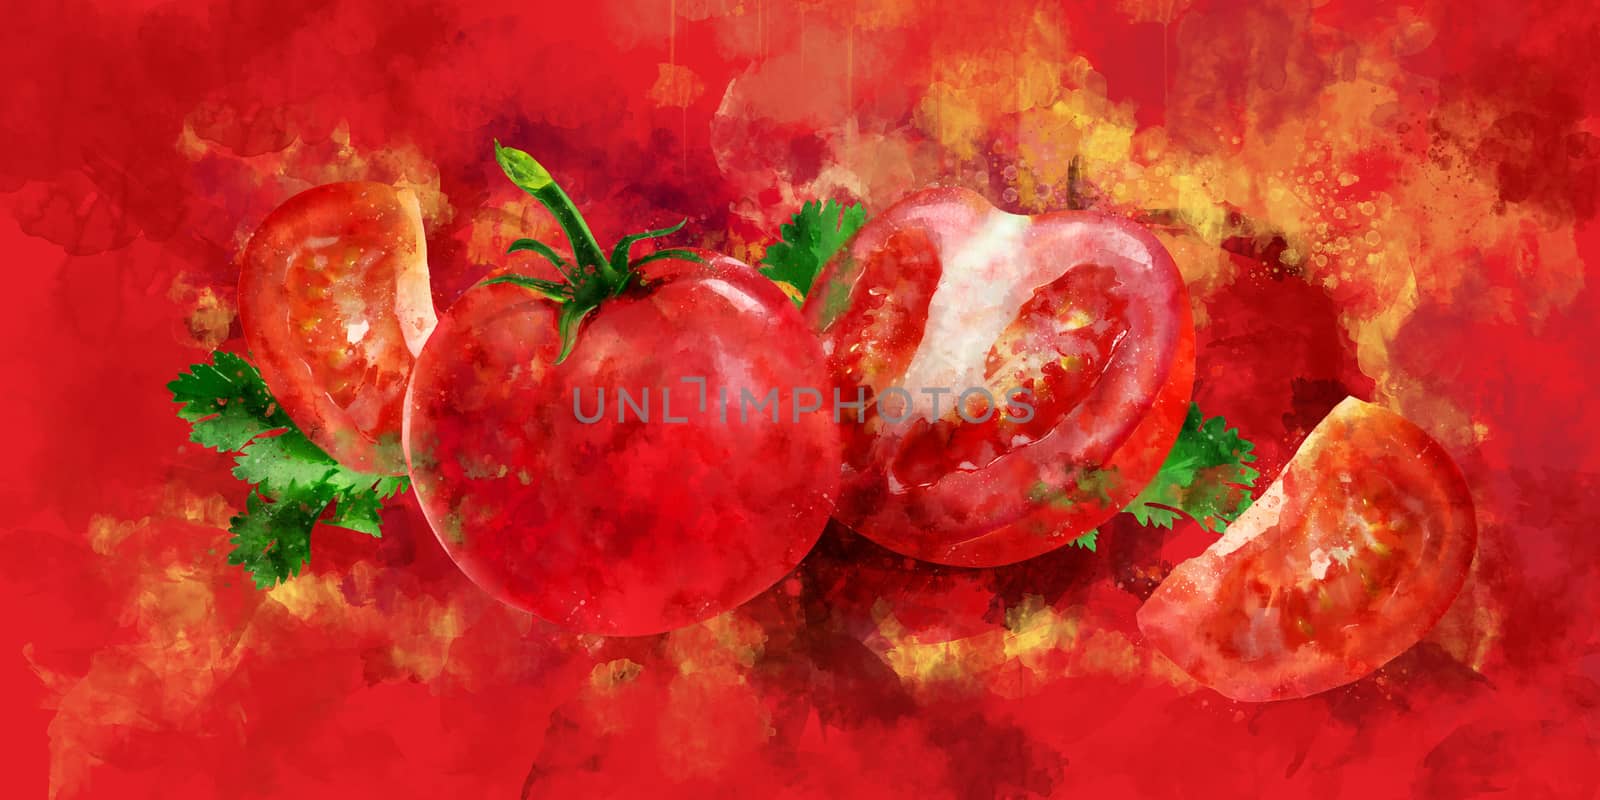 Tomato on red background. Watercolor illustration by ConceptCafe